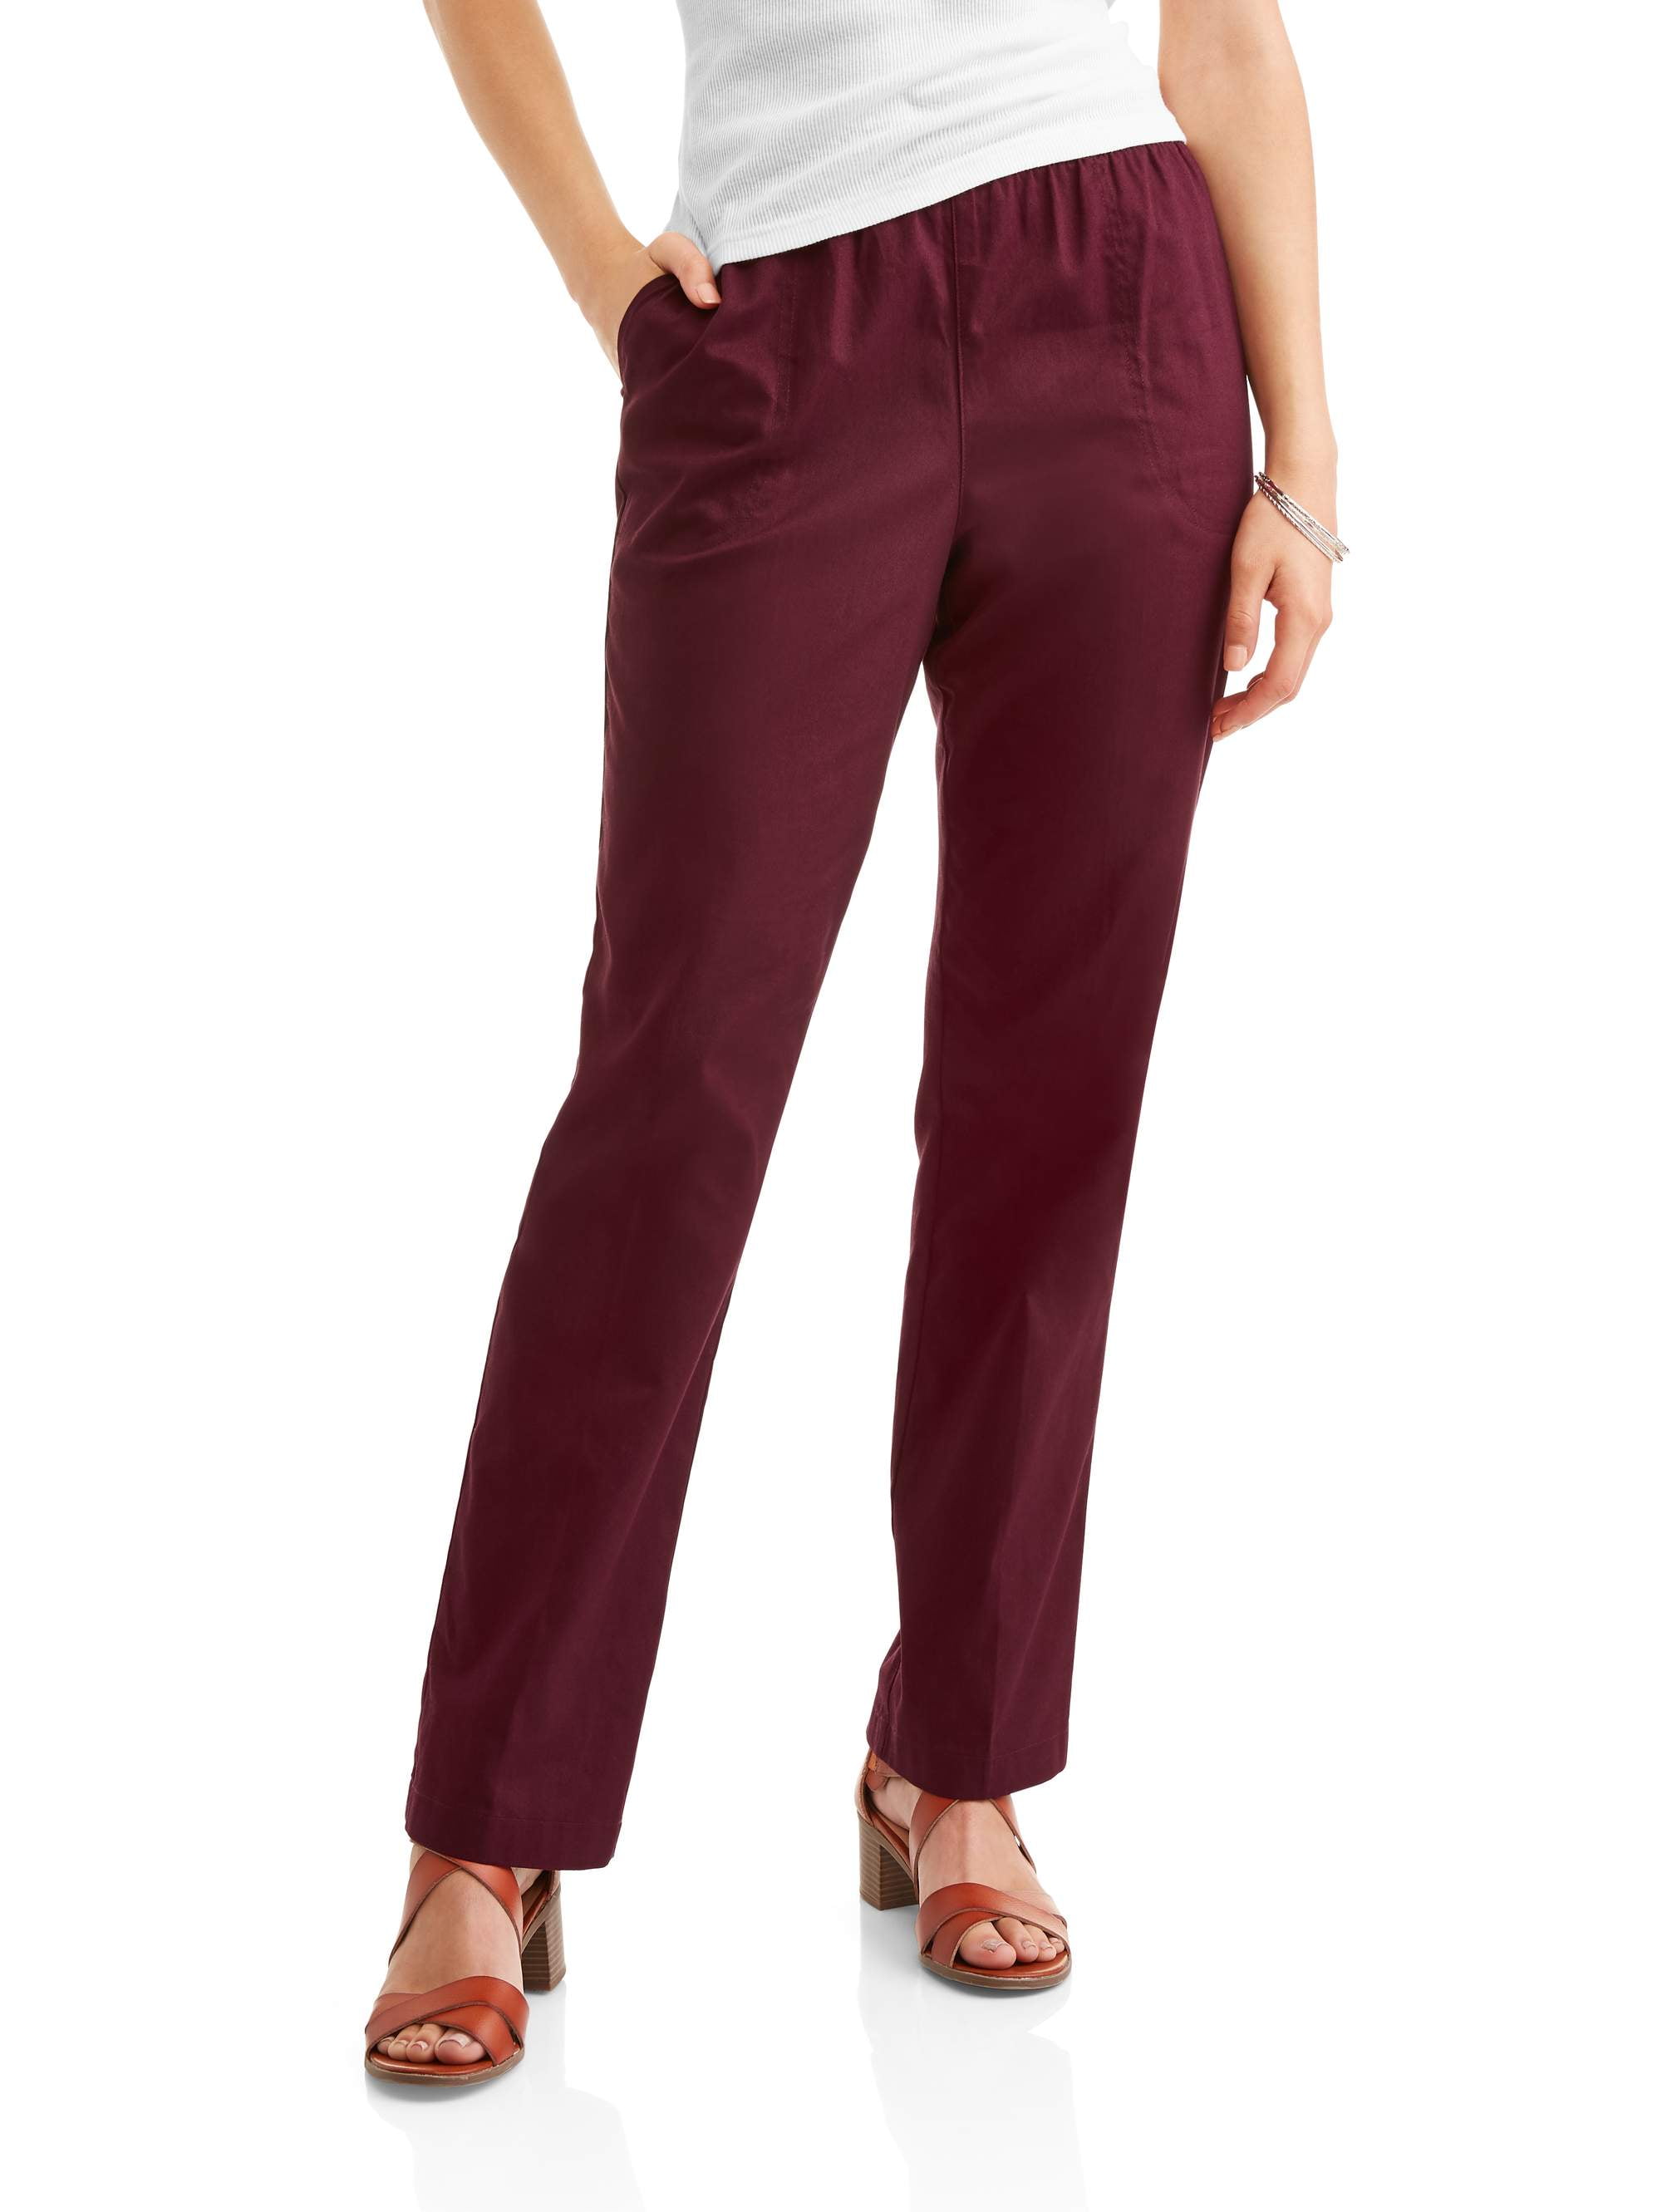 White Stag - Women's Woven Pull-On Pants - Walmart.com